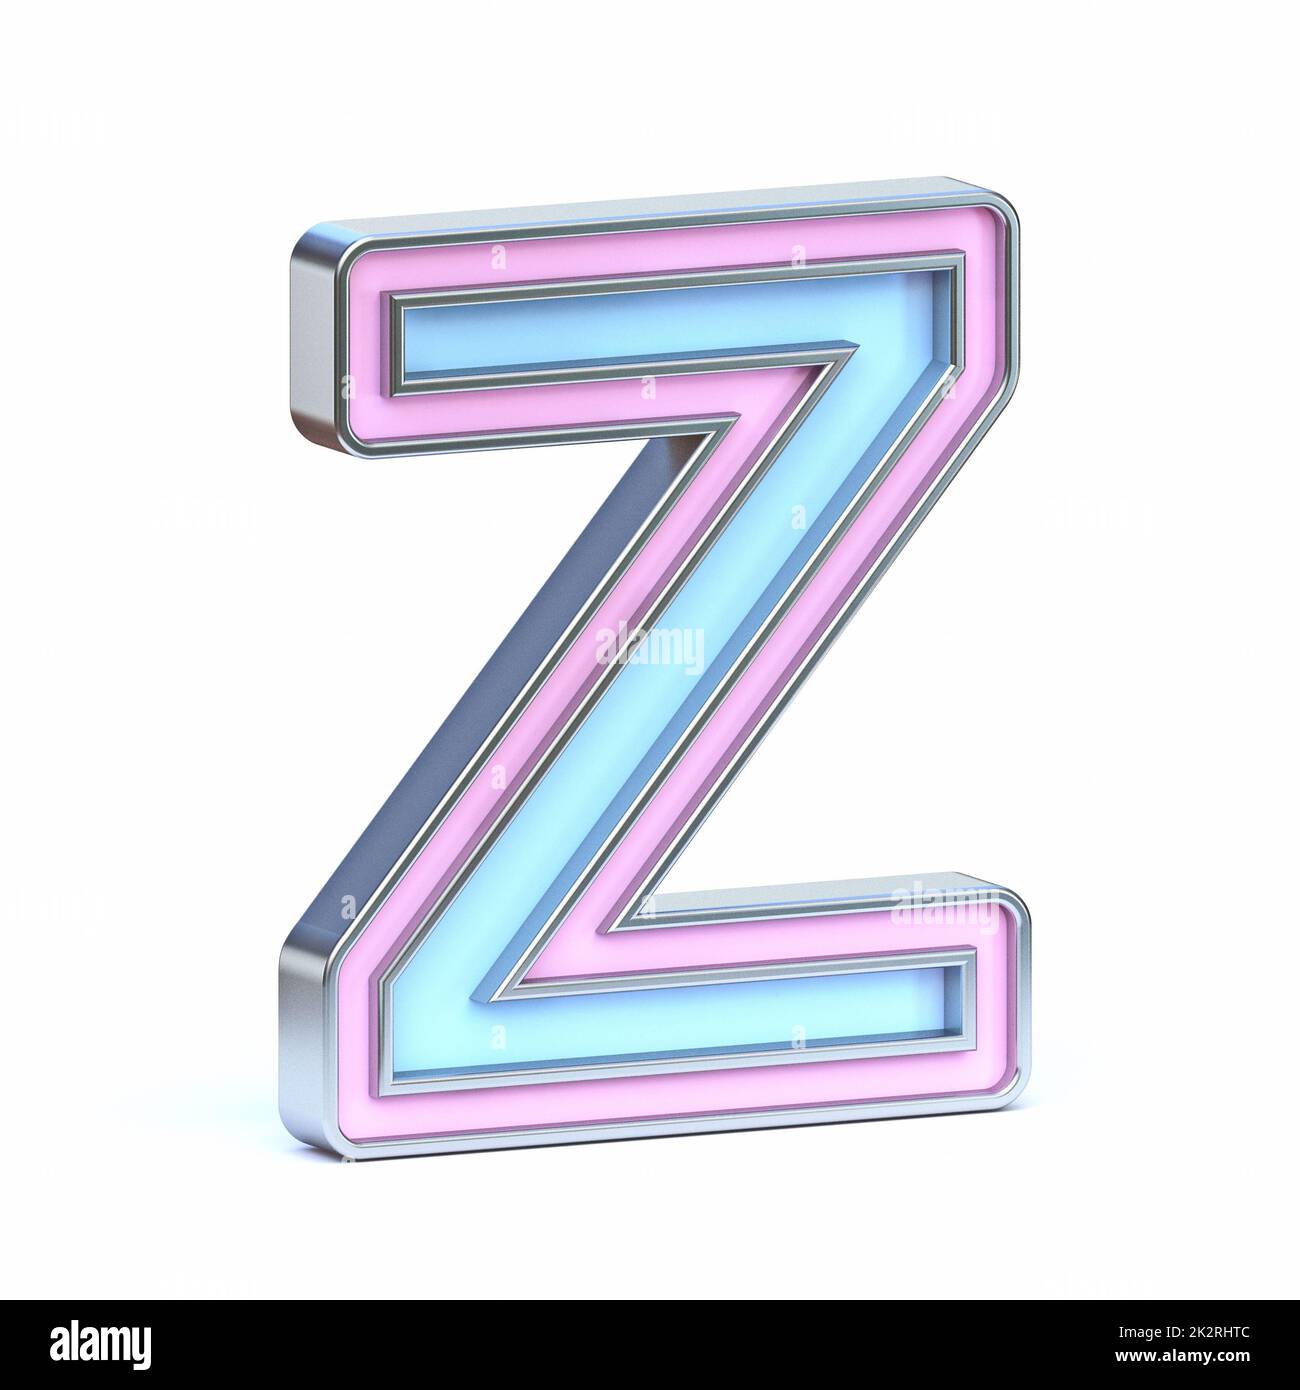 Blue and pink metal font Letter Z 3D Stock Photo